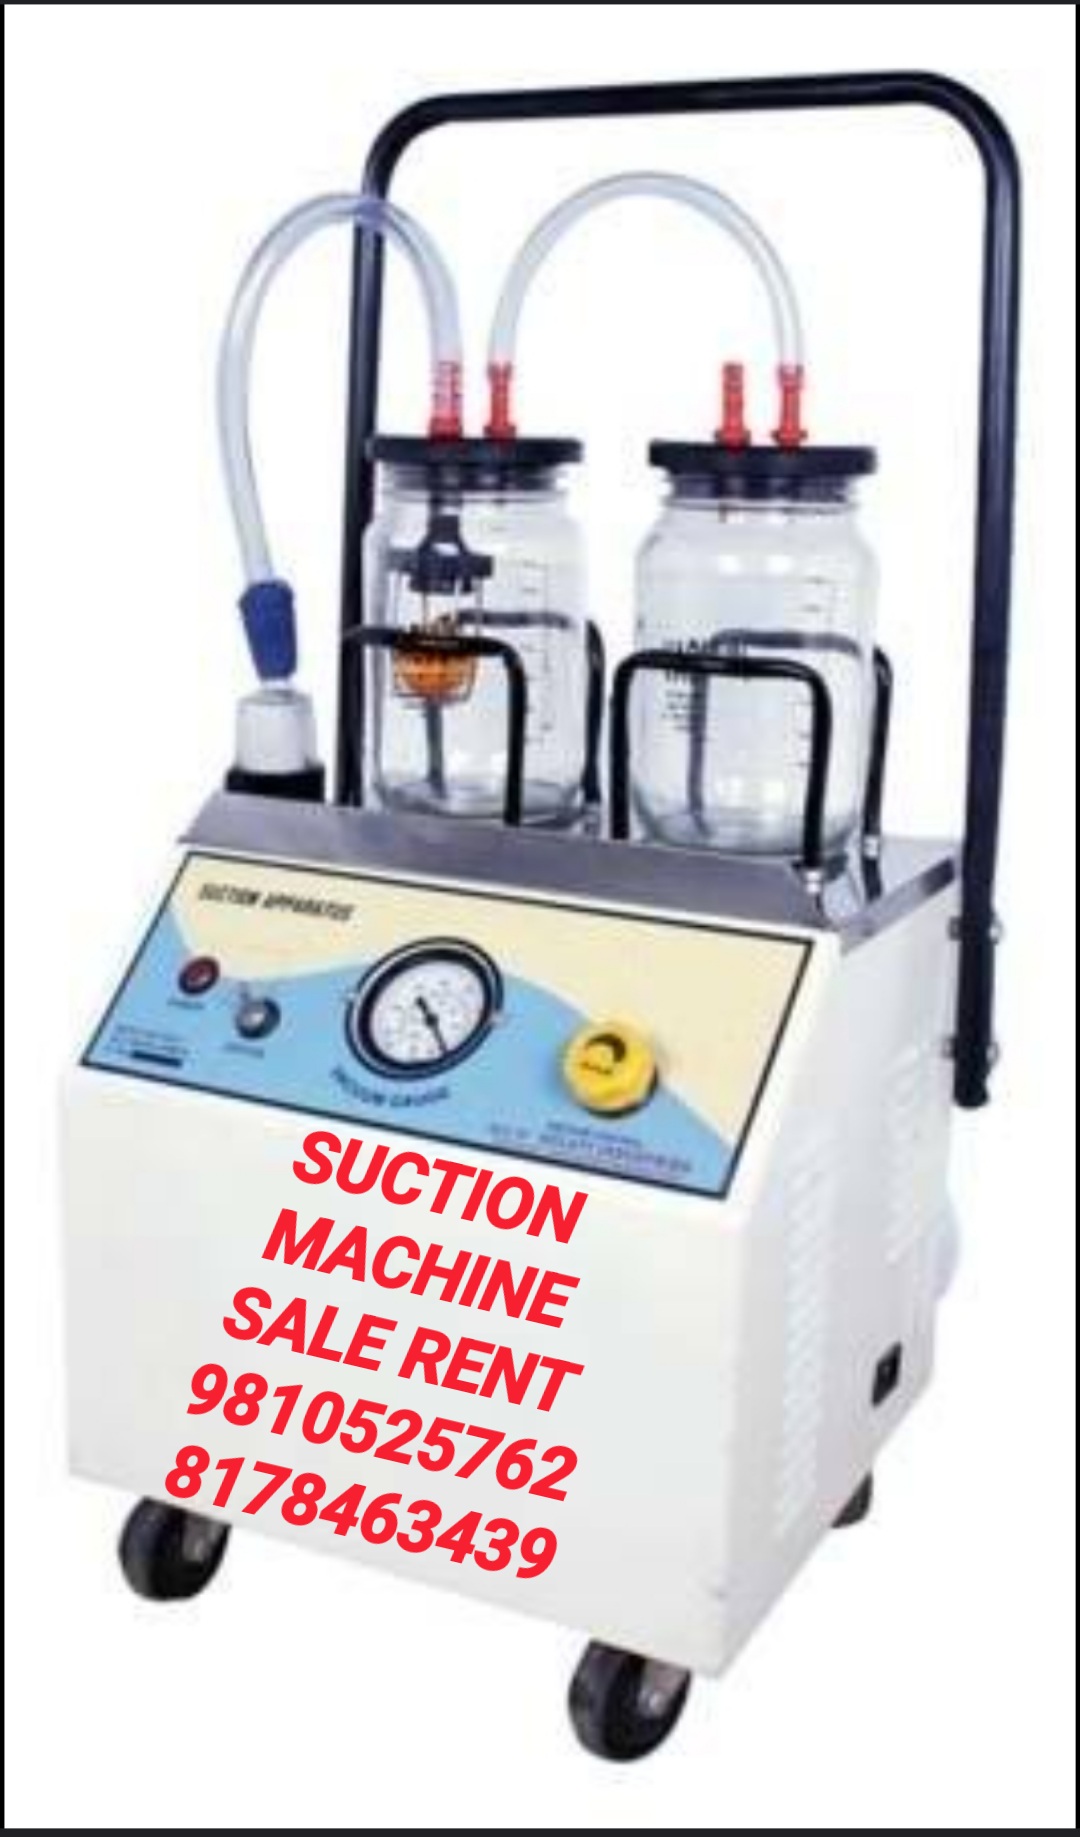 SUCTION MACHINE FOR ON RENT GHAZIABAD 8178463439